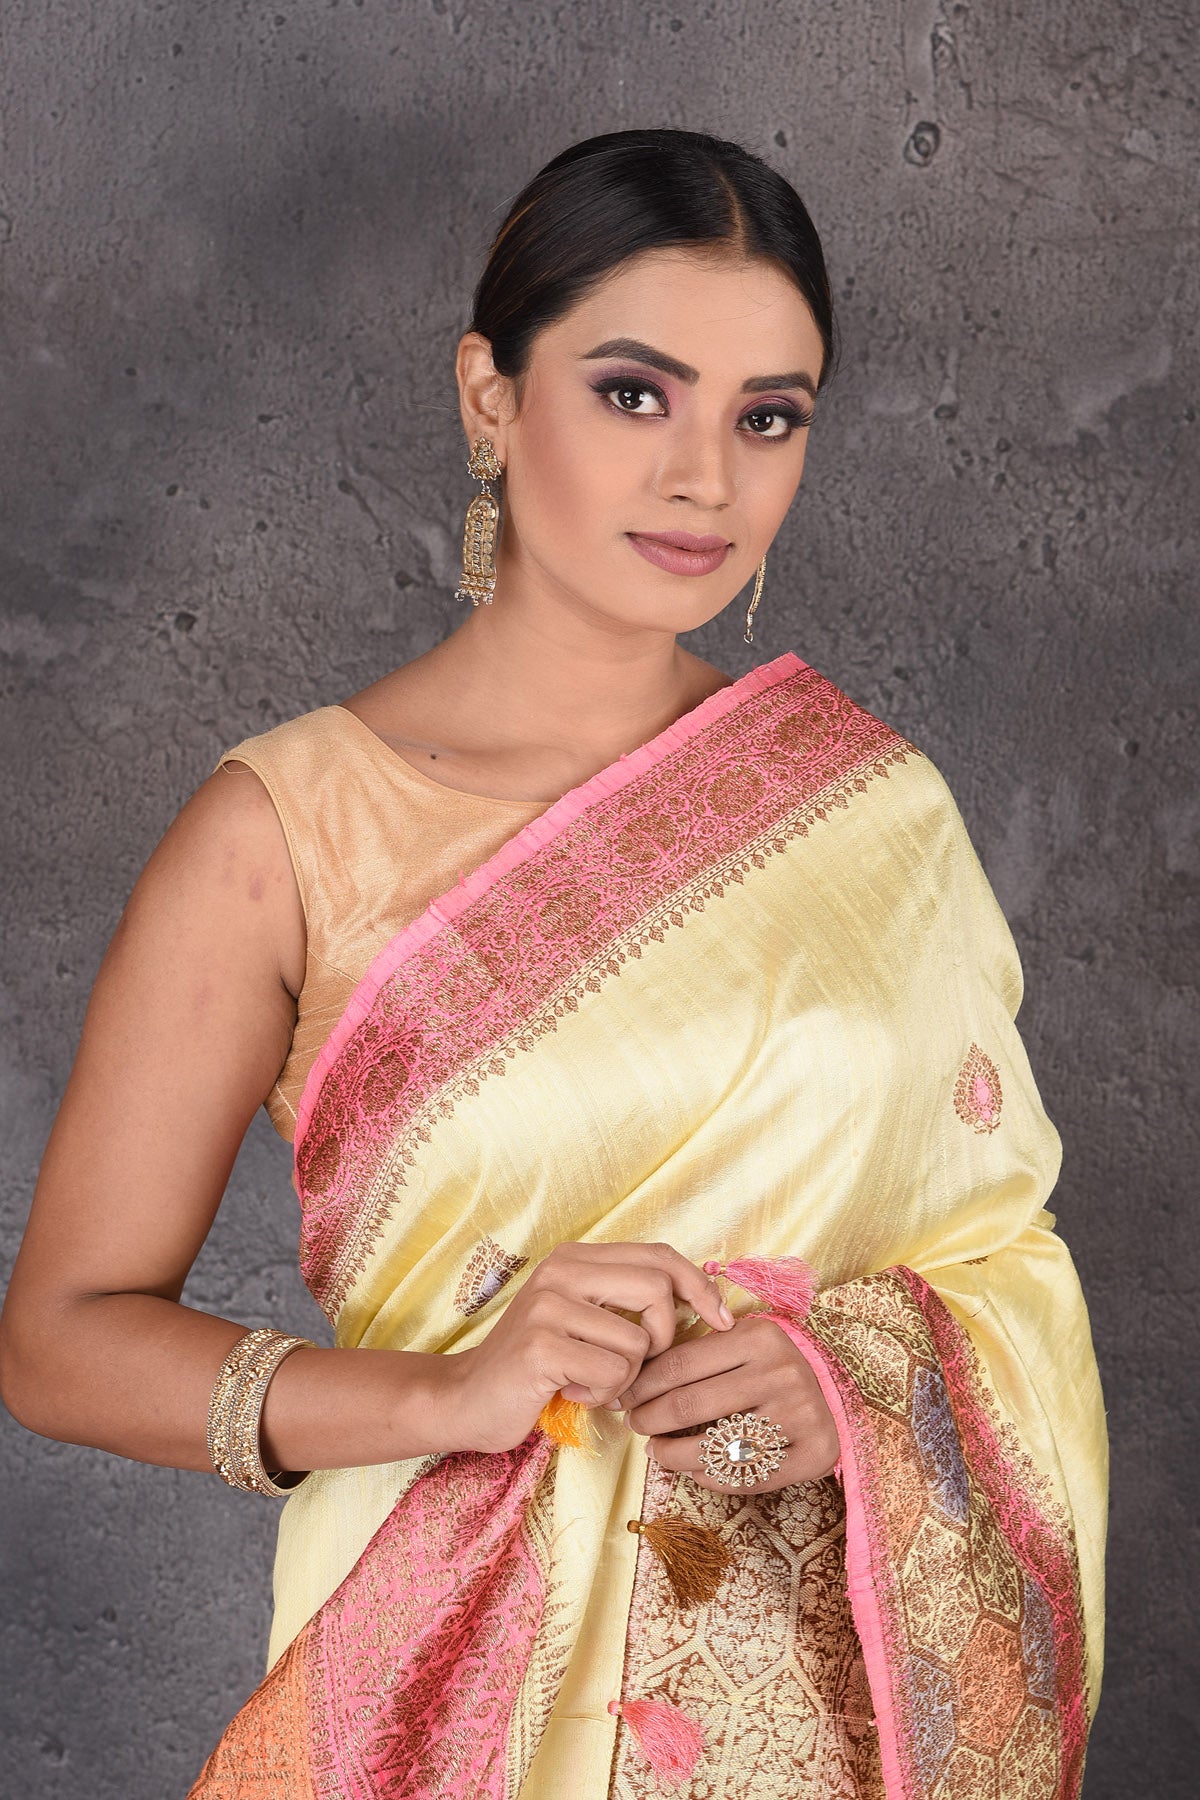 Buy stunning light yellow dupion silk saree online in USA with antique zari border. Flaunt your ethnic style on special occasions with latest designer sarees, pure silk sarees, handwoven sarees, Kanchipuram silk sarees, embroidered sarees, georgette sarees, party sarees from Pure Elegance Indian saree store in USA.-closeup